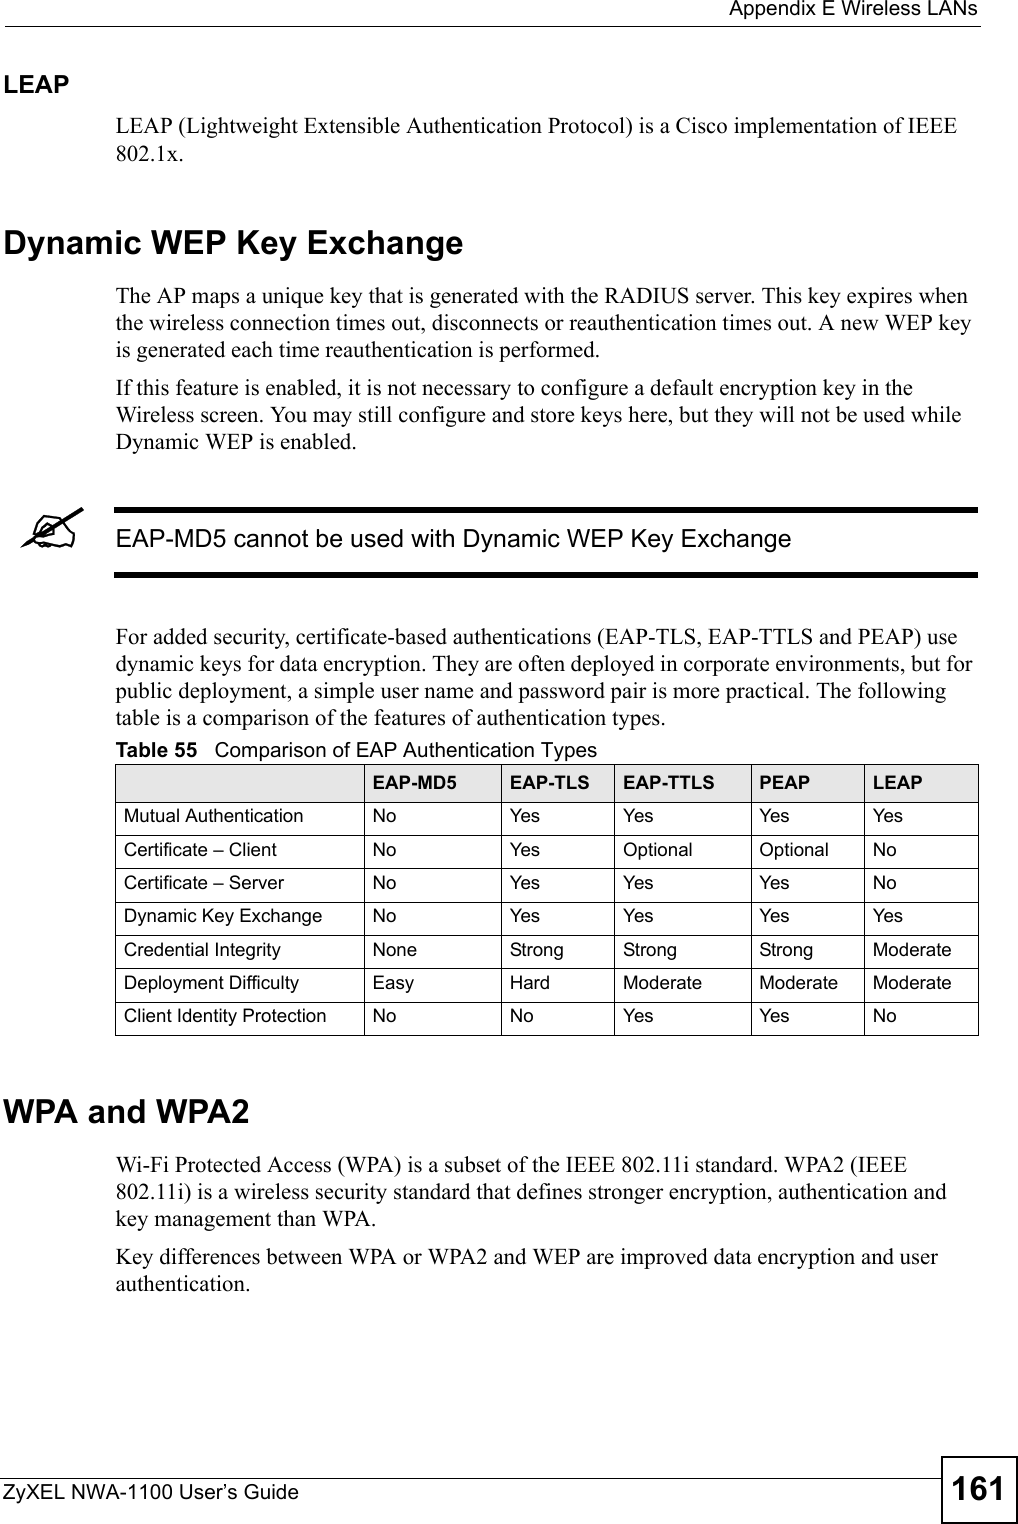  Appendix E Wireless LANsZyXEL NWA-1100 User’s Guide 161LEAPLEAP (Lightweight Extensible Authentication Protocol) is a Cisco implementation of IEEE 802.1x. Dynamic WEP Key ExchangeThe AP maps a unique key that is generated with the RADIUS server. This key expires when the wireless connection times out, disconnects or reauthentication times out. A new WEP key is generated each time reauthentication is performed.If this feature is enabled, it is not necessary to configure a default encryption key in the Wireless screen. You may still configure and store keys here, but they will not be used while Dynamic WEP is enabled.&quot;EAP-MD5 cannot be used with Dynamic WEP Key ExchangeFor added security, certificate-based authentications (EAP-TLS, EAP-TTLS and PEAP) use dynamic keys for data encryption. They are often deployed in corporate environments, but for public deployment, a simple user name and password pair is more practical. The following table is a comparison of the features of authentication types.WPA and WPA2Wi-Fi Protected Access (WPA) is a subset of the IEEE 802.11i standard. WPA2 (IEEE 802.11i) is a wireless security standard that defines stronger encryption, authentication and key management than WPA. Key differences between WPA or WPA2 and WEP are improved data encryption and user authentication.Table 55   Comparison of EAP Authentication TypesEAP-MD5 EAP-TLS EAP-TTLS PEAP LEAPMutual Authentication No Yes Yes Yes YesCertificate – Client No Yes Optional Optional NoCertificate – Server No Yes Yes Yes NoDynamic Key Exchange No Yes Yes Yes YesCredential Integrity None Strong Strong Strong ModerateDeployment Difficulty Easy Hard Moderate Moderate ModerateClient Identity Protection No No Yes Yes No